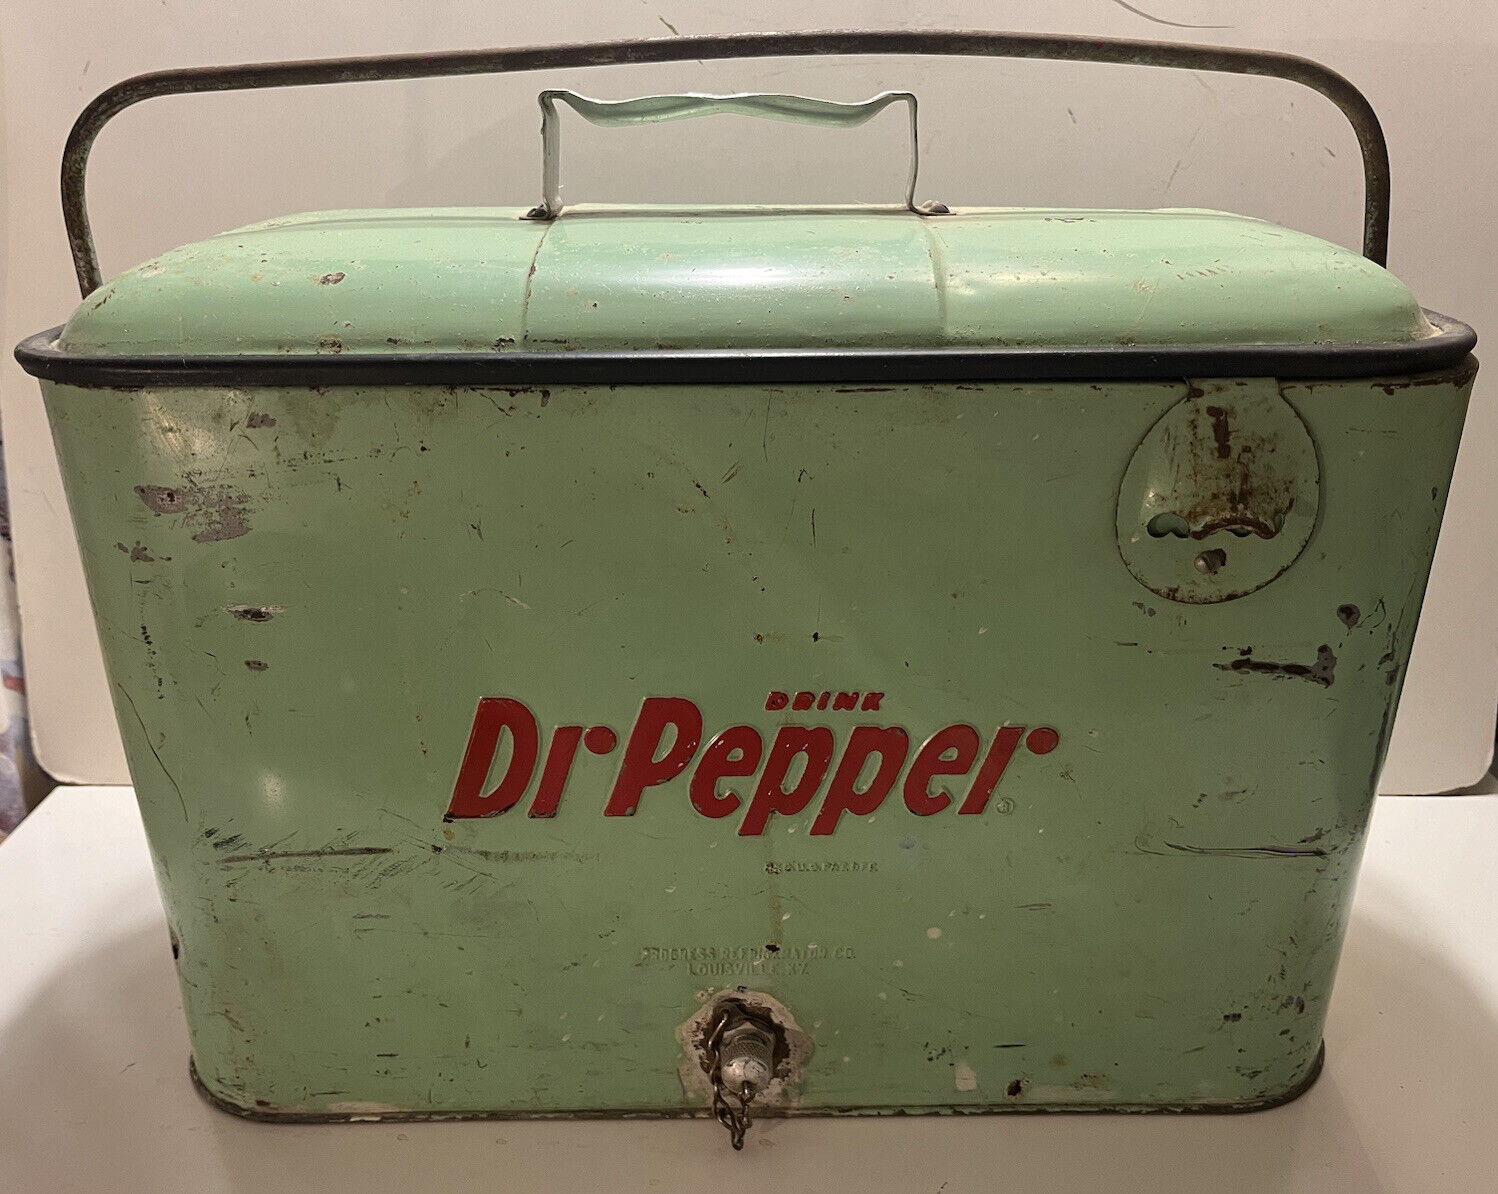 Very Rare Dr Pepper Cooler With Opener By Progress Refrigeration Co.